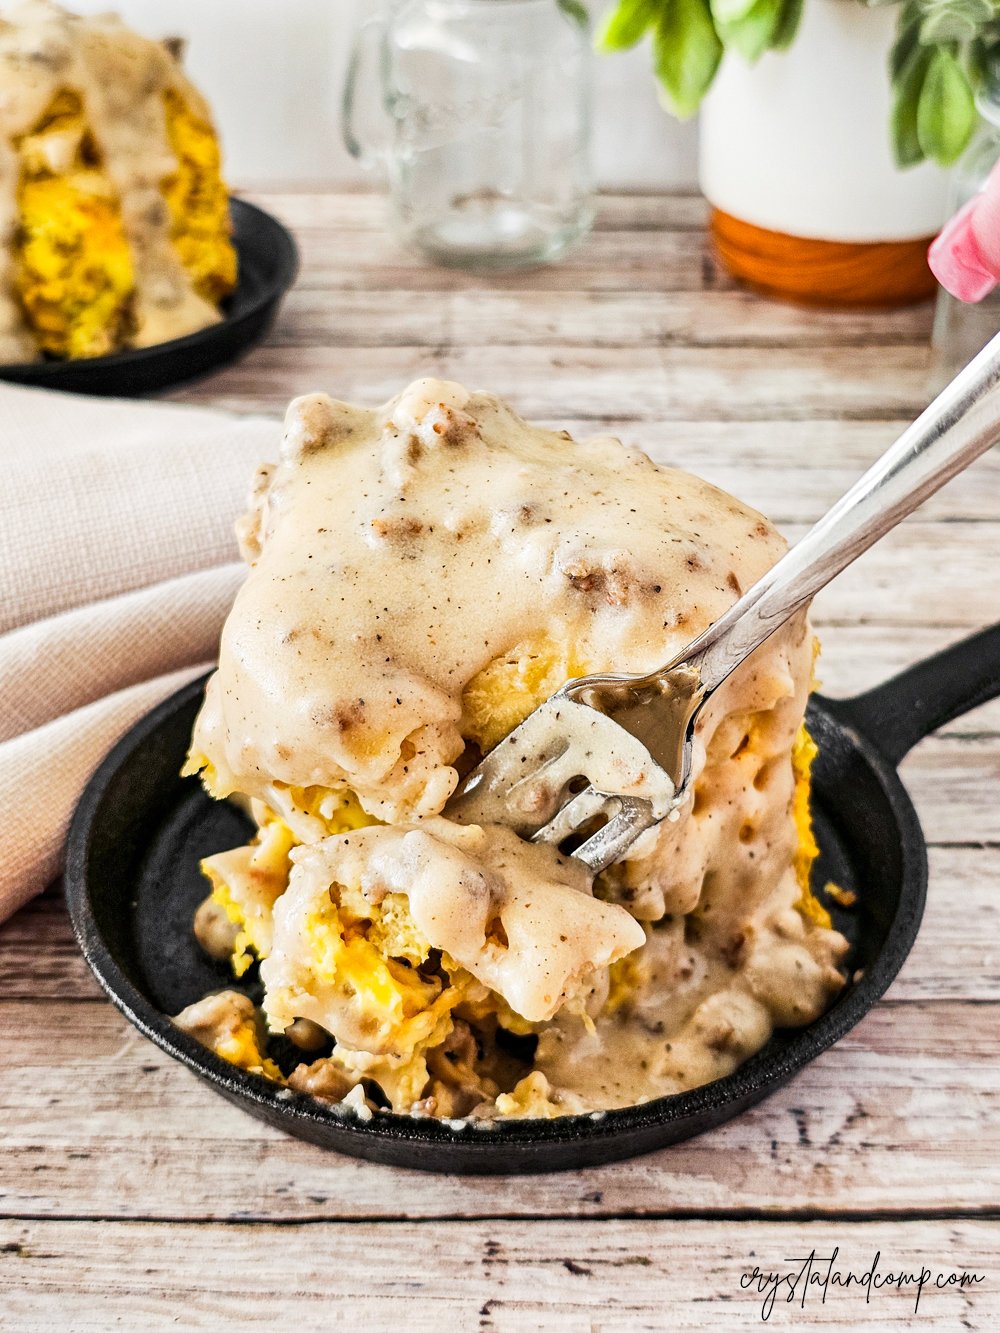 Crockpot Biscuit and Gravy Casserole from Crystal and Comp.